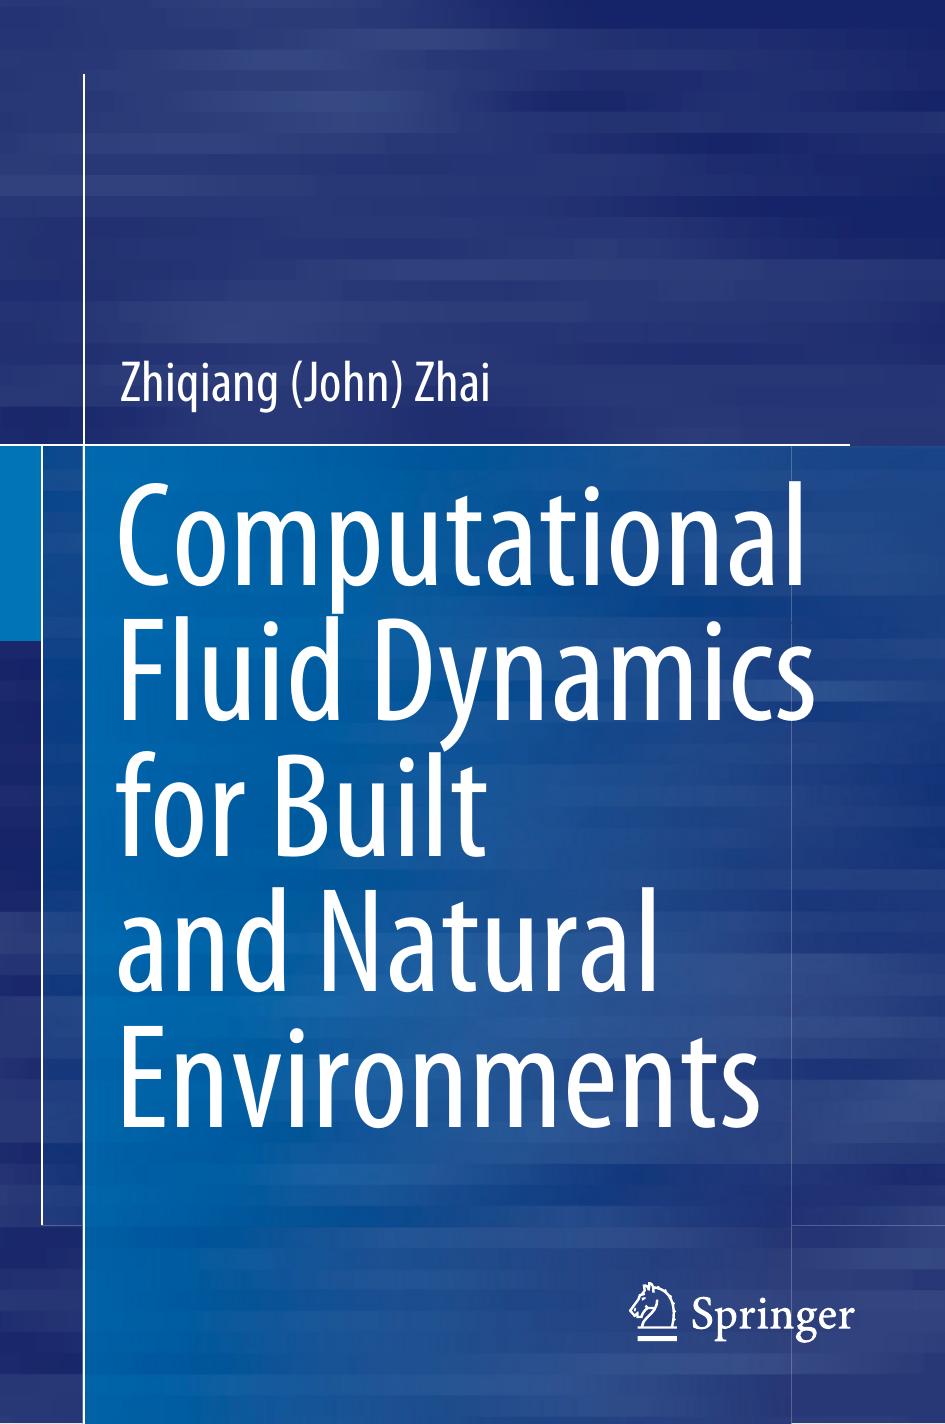 Computational Fluid Dynamics for Built and Natural Environments by Zhiqiang (John) Zhai